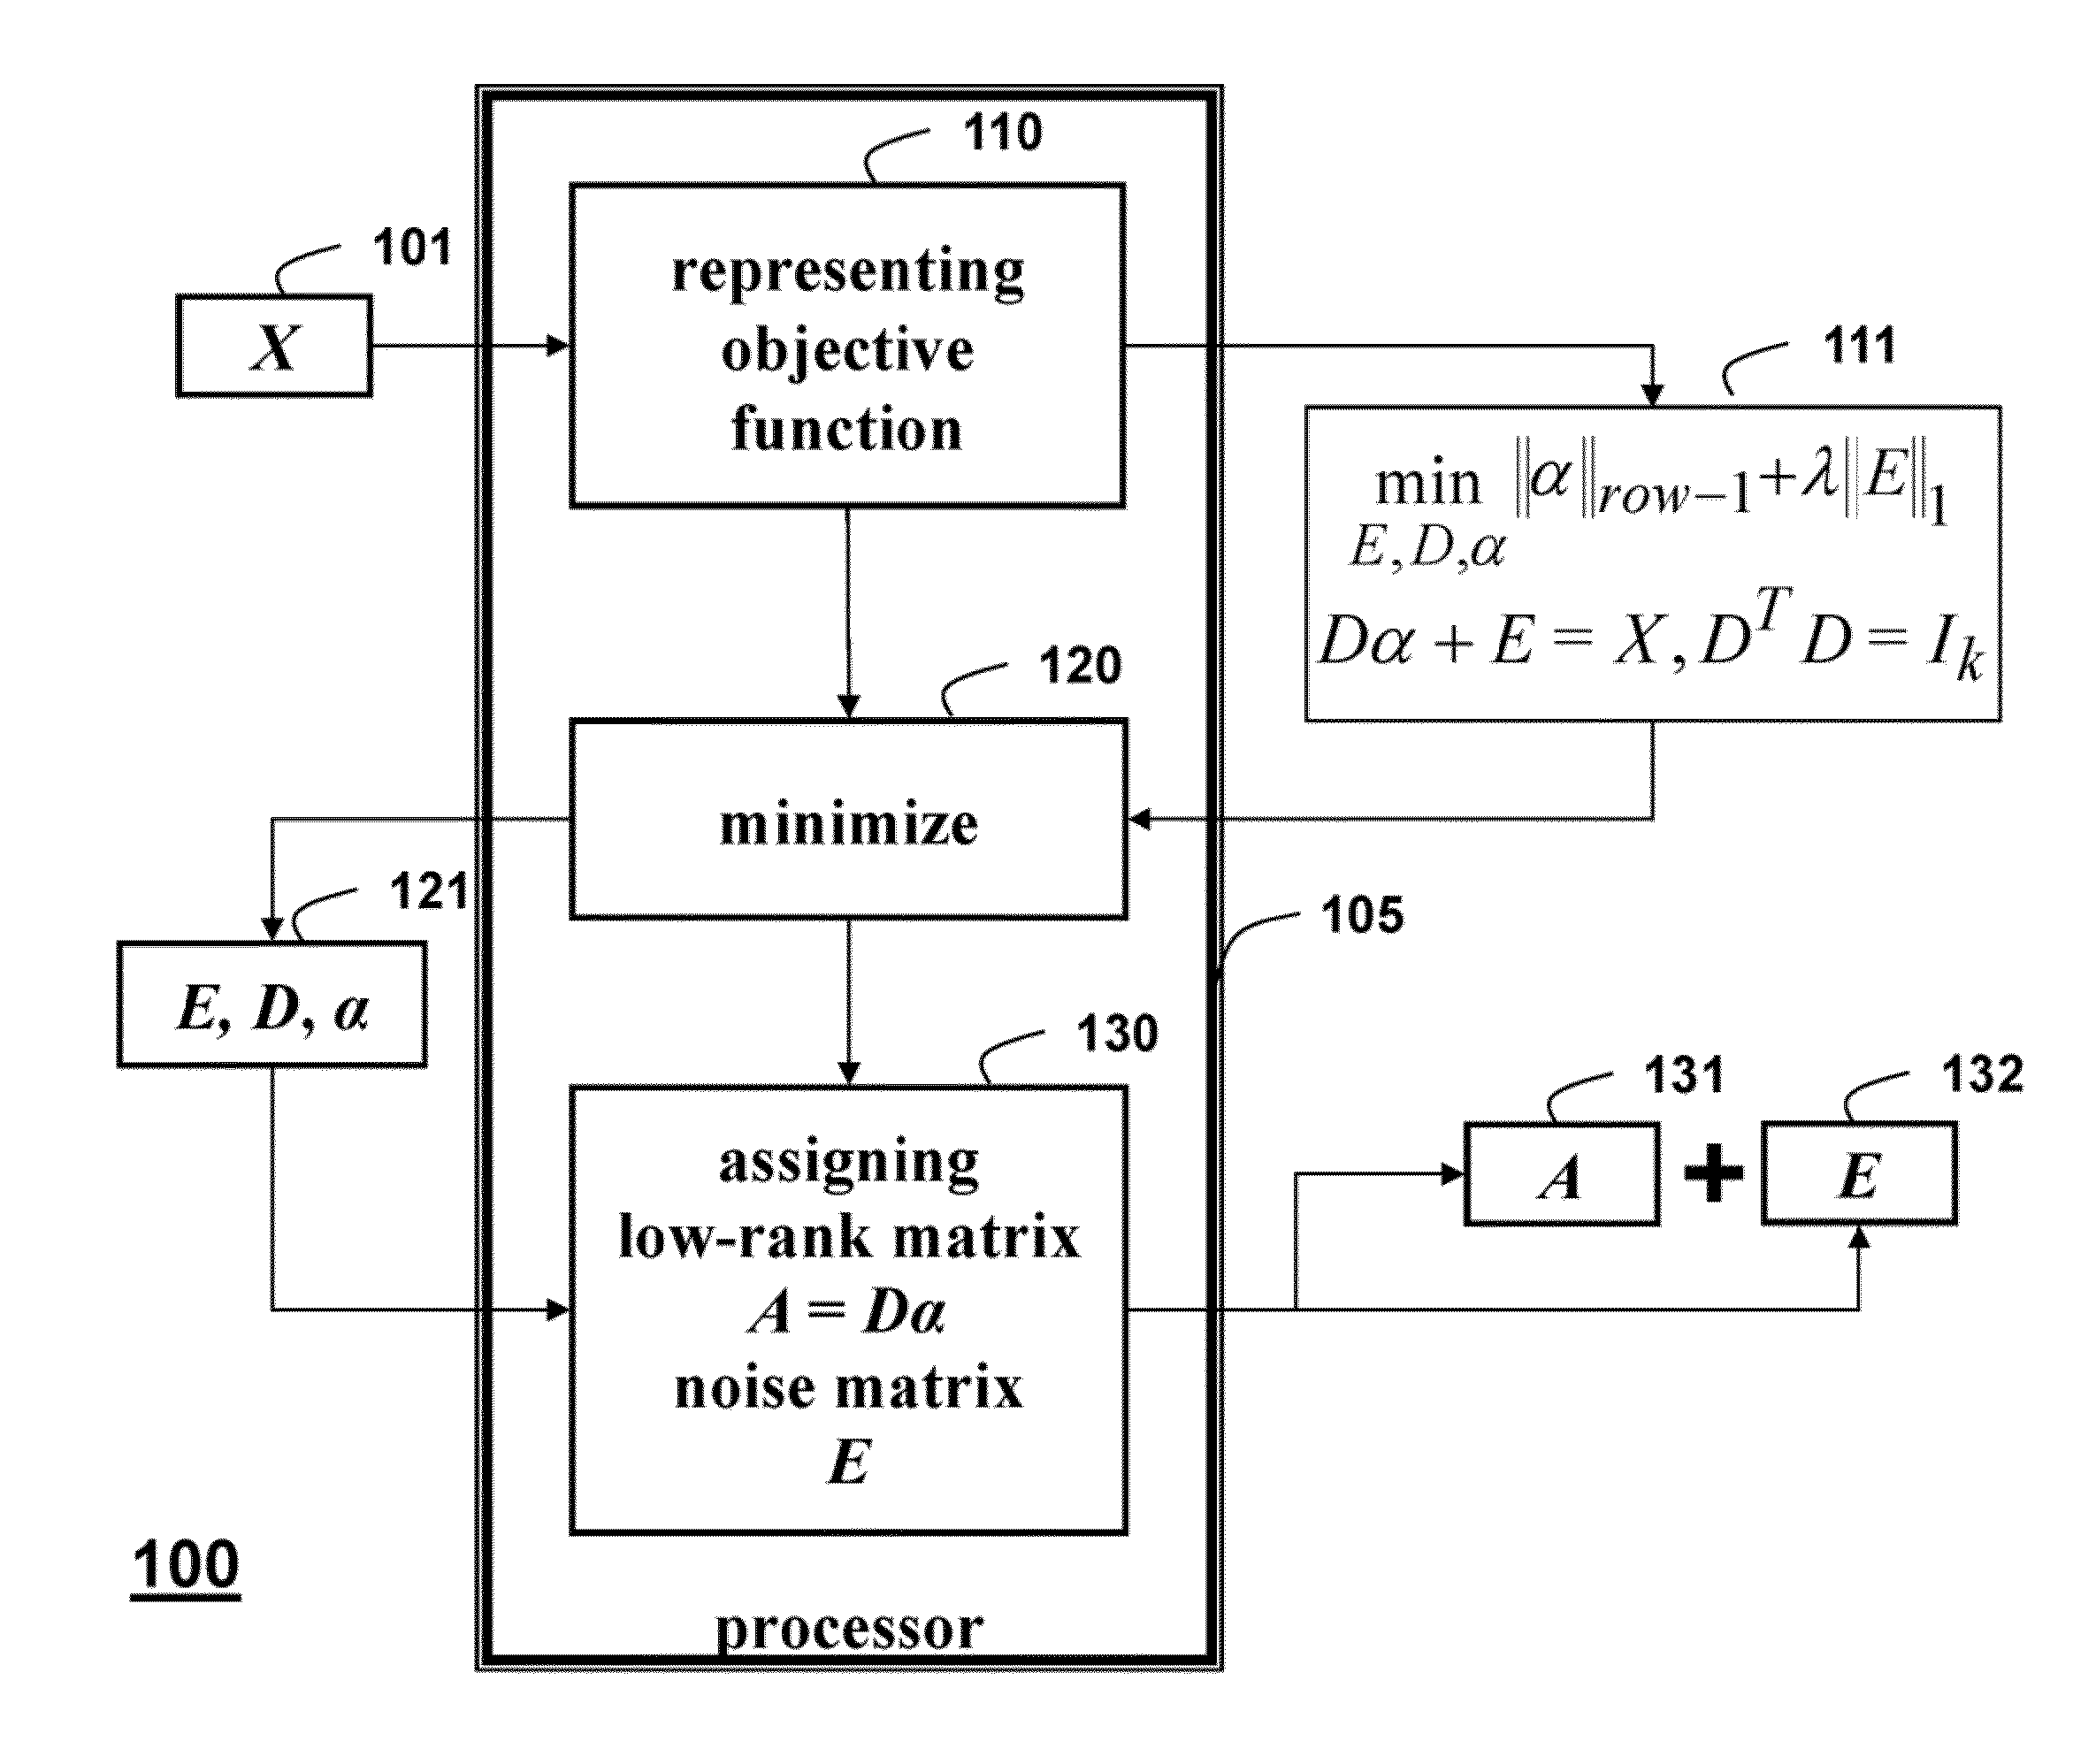 Method for recovering low-rank matrices and subspaces from data in high-dimensional matrices